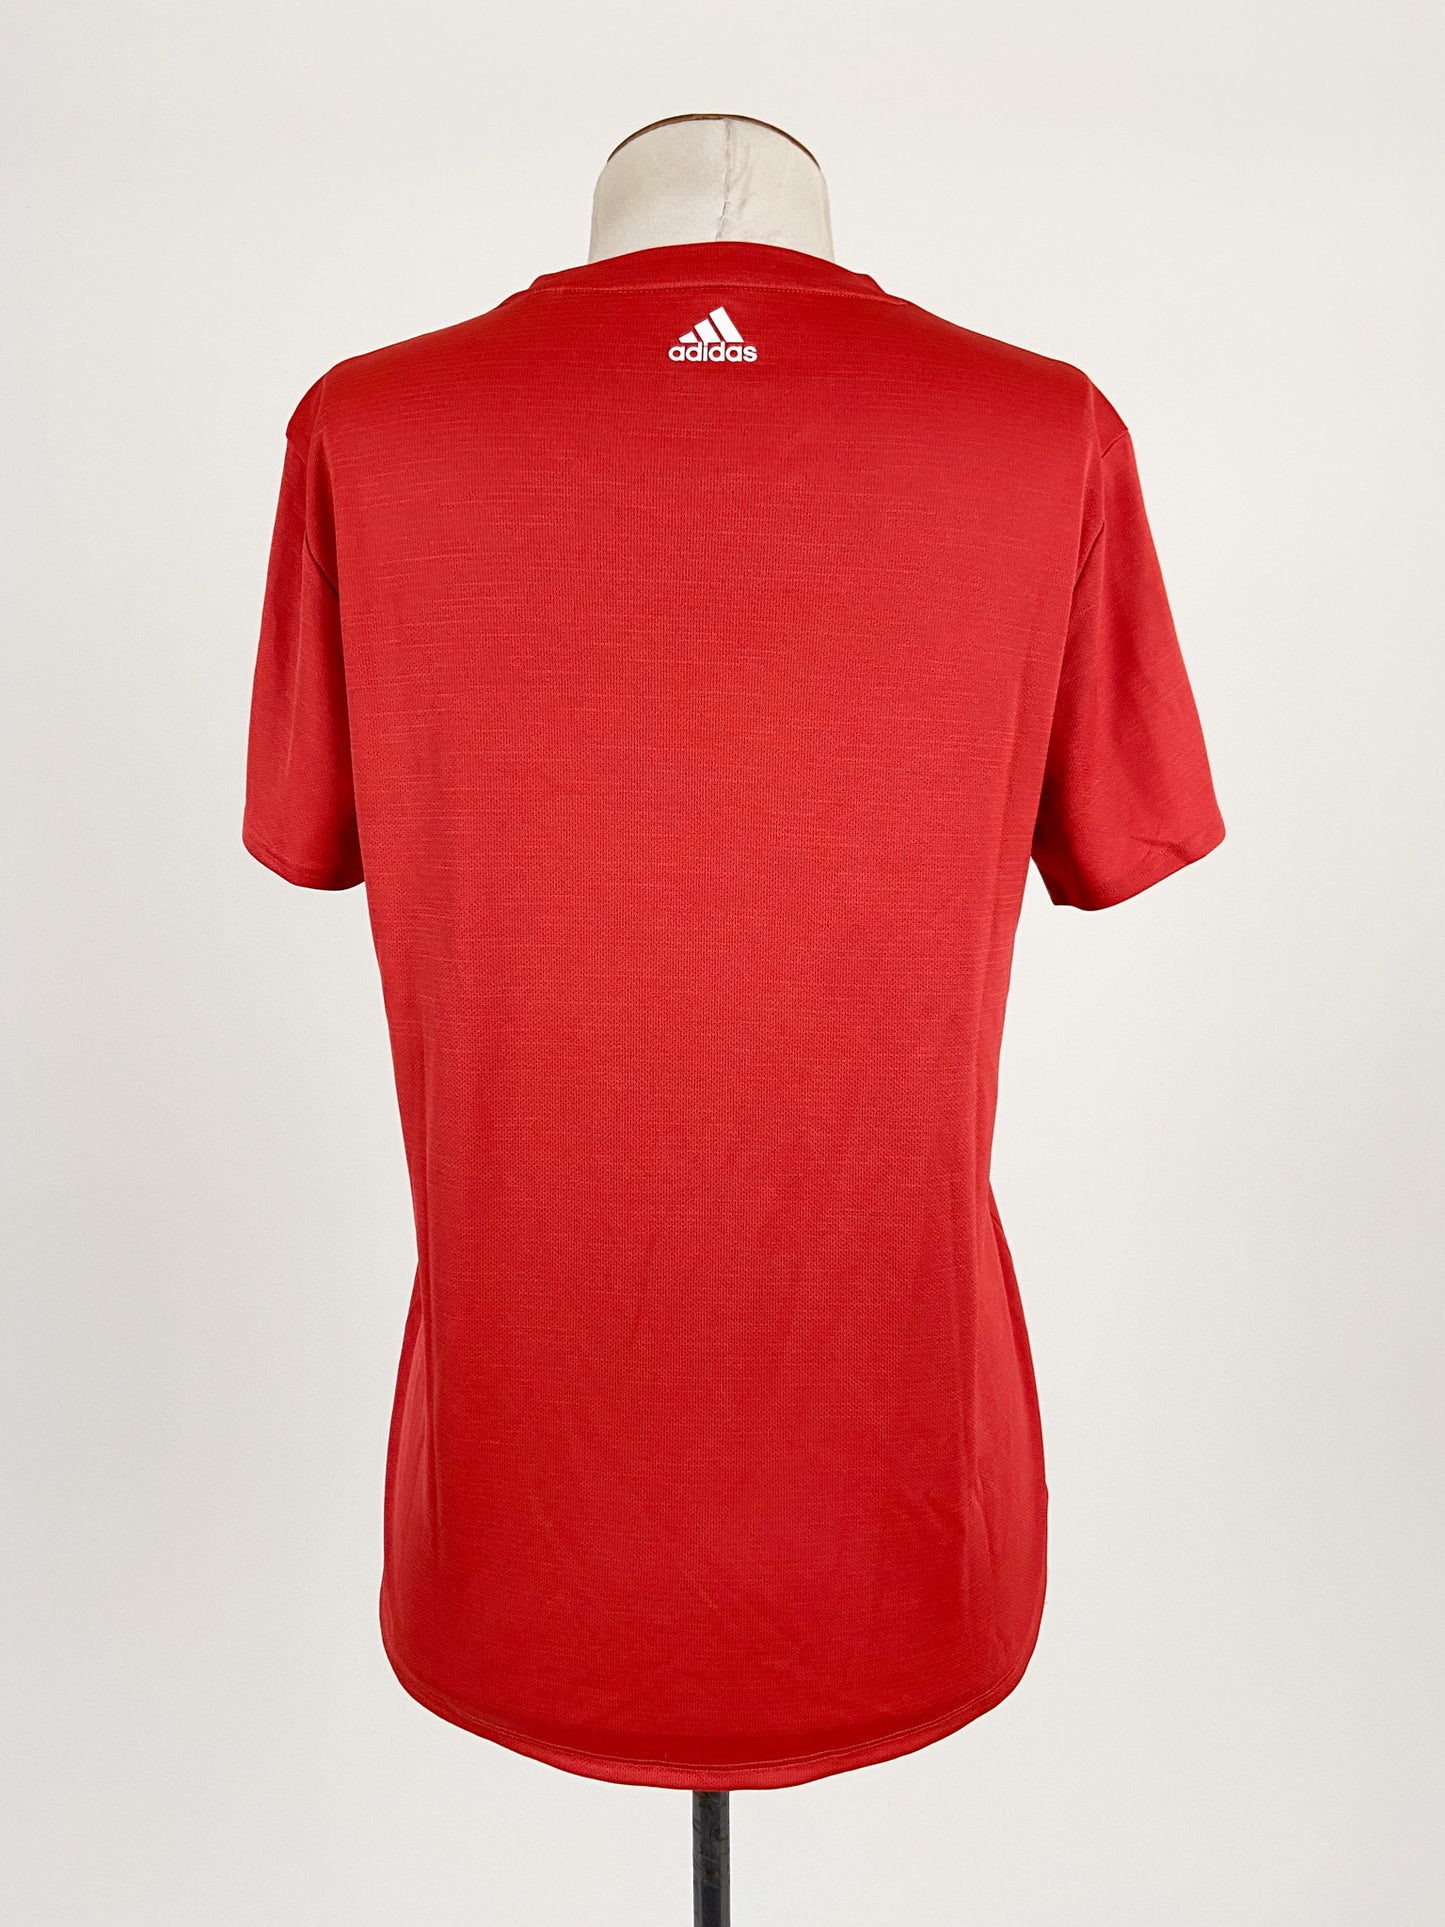 Adidas | Red Casual Activewear Top | Size S